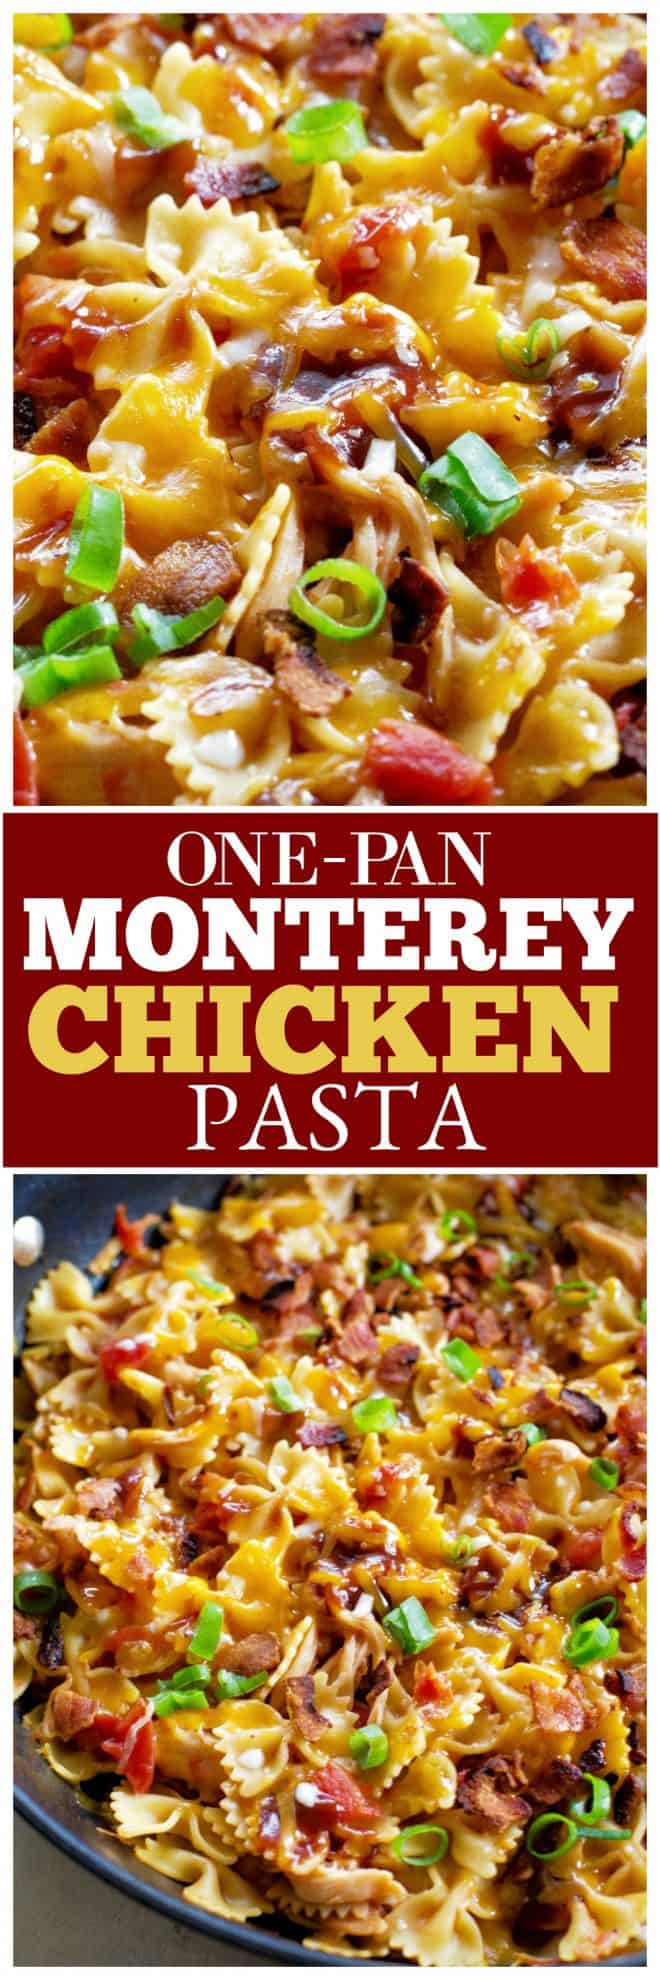 One-Pan Monterey Chicken Pasta - The Girl Who Ate Everything